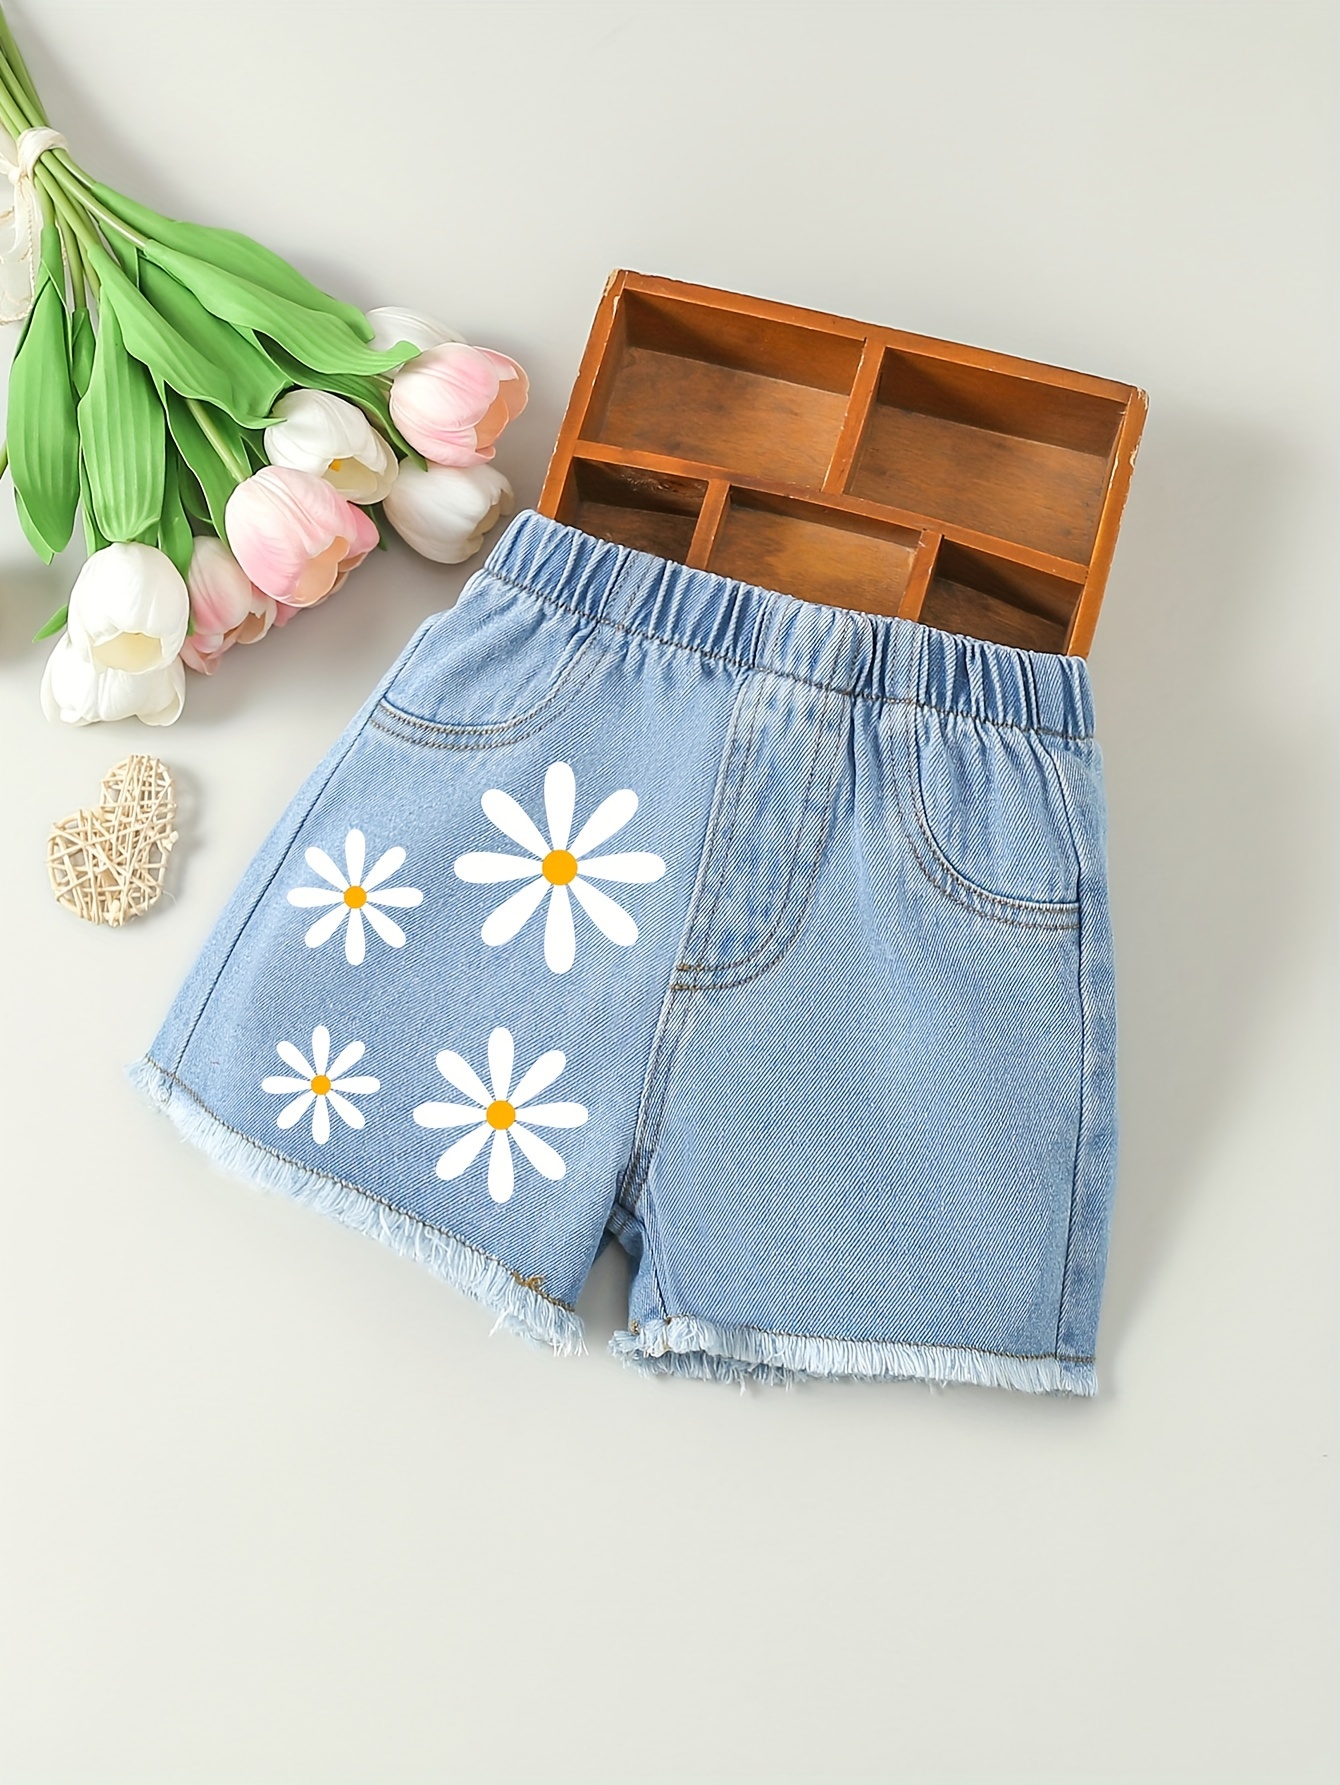 Jeans Embroidery Kit: Daisies and Bee -  Canada